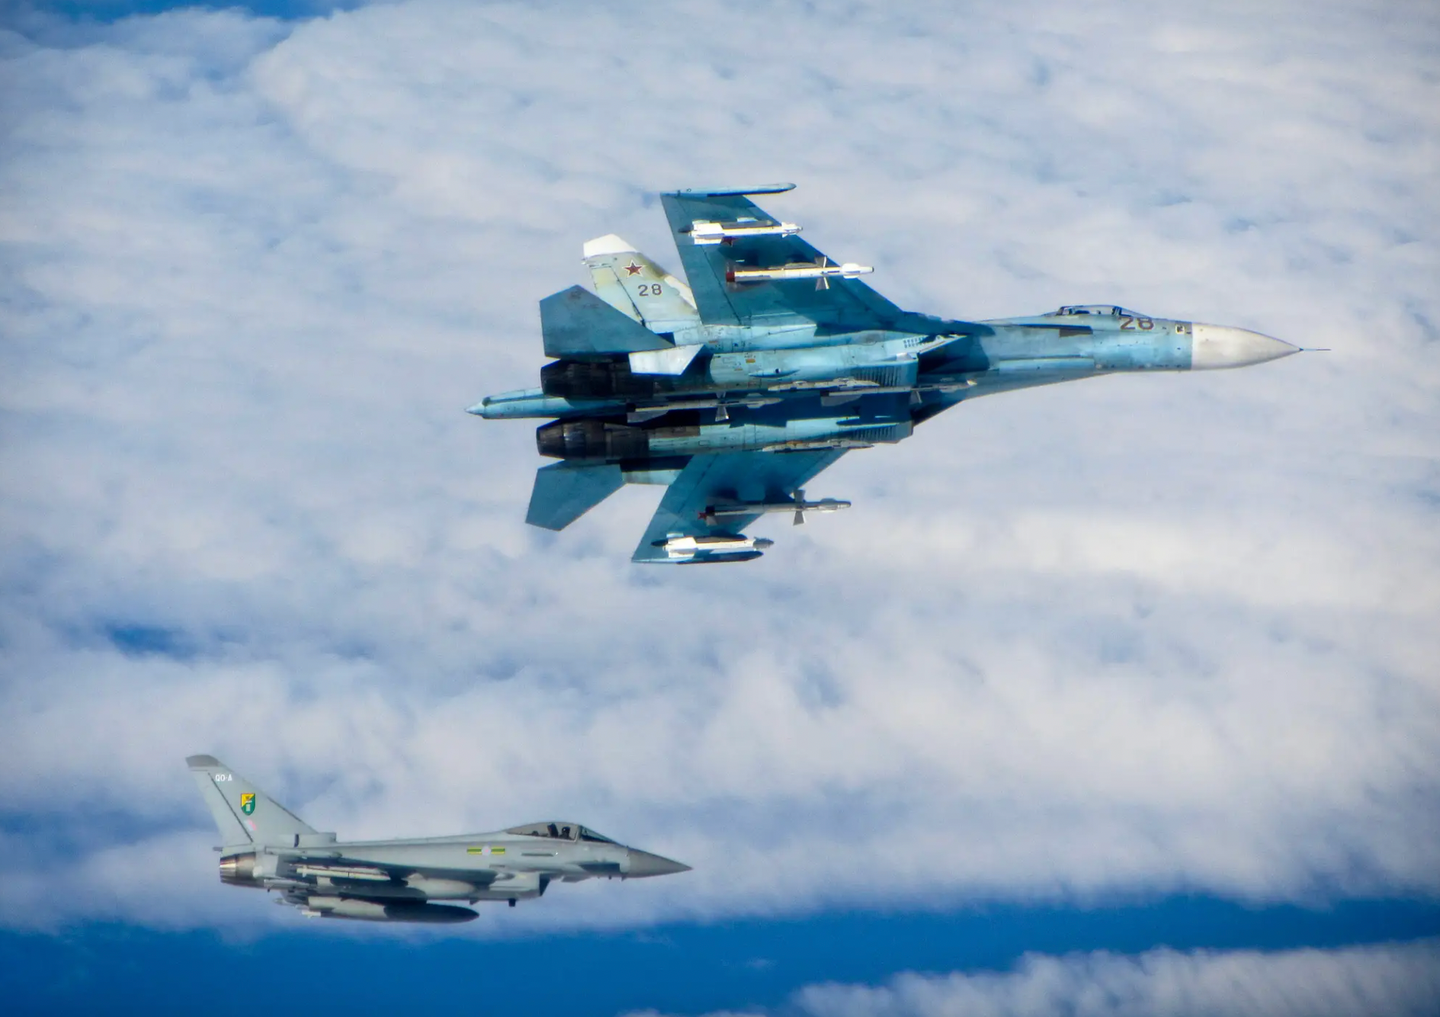 A Russian Su-27 Flanker banks away from an RAF Typhoon in international airspace over the Baltic Sea in June 2014. The Russian fighter is armed with a mix of radar- and infrared-guided R-27 and heat-seeking R-73 air-to-air missiles.&nbsp;<em>Crown Copyright</em>